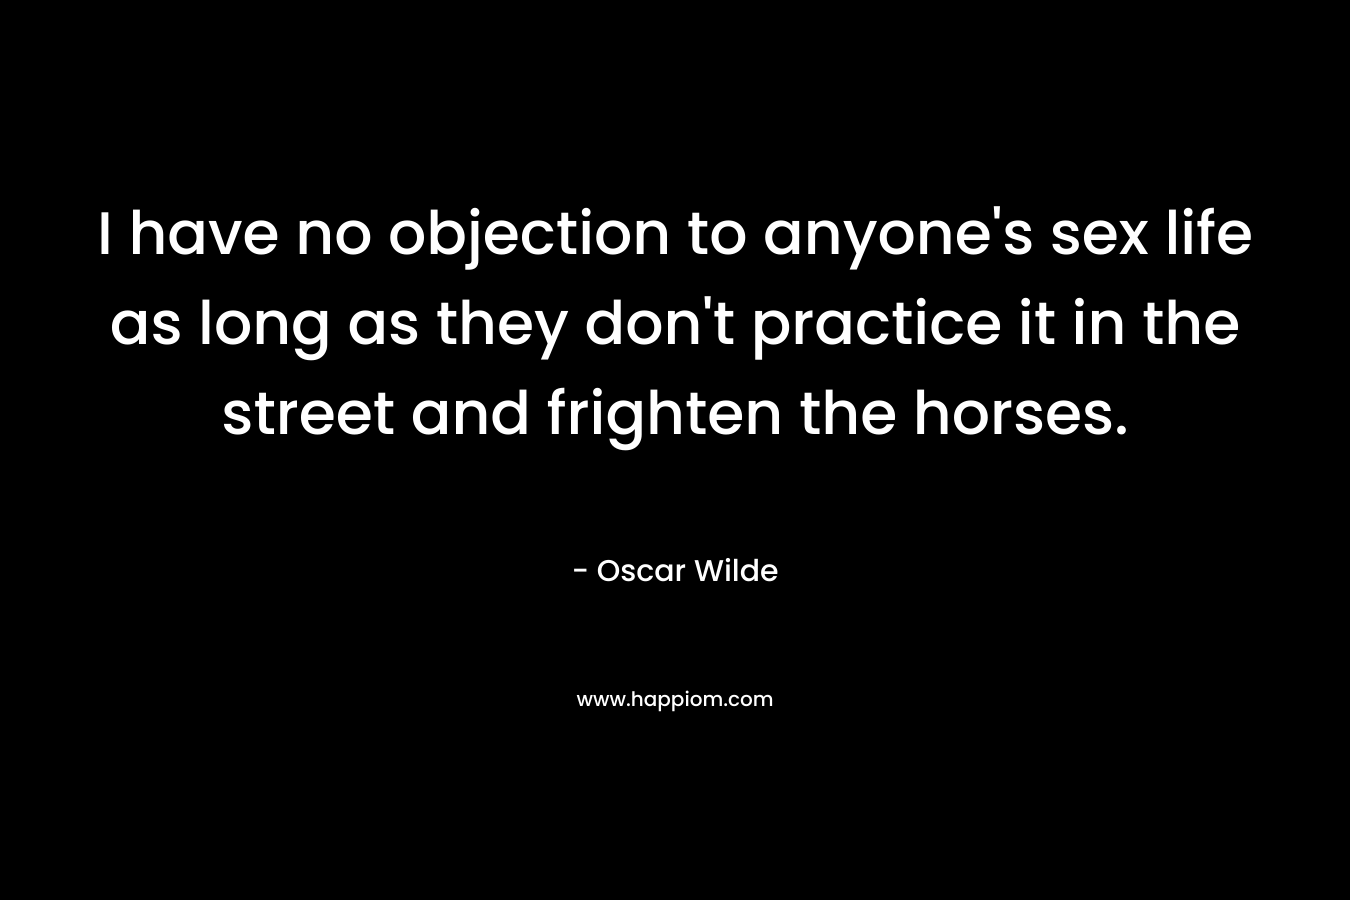 I have no objection to anyone’s sex life as long as they don’t practice it in the street and frighten the horses. – Oscar Wilde